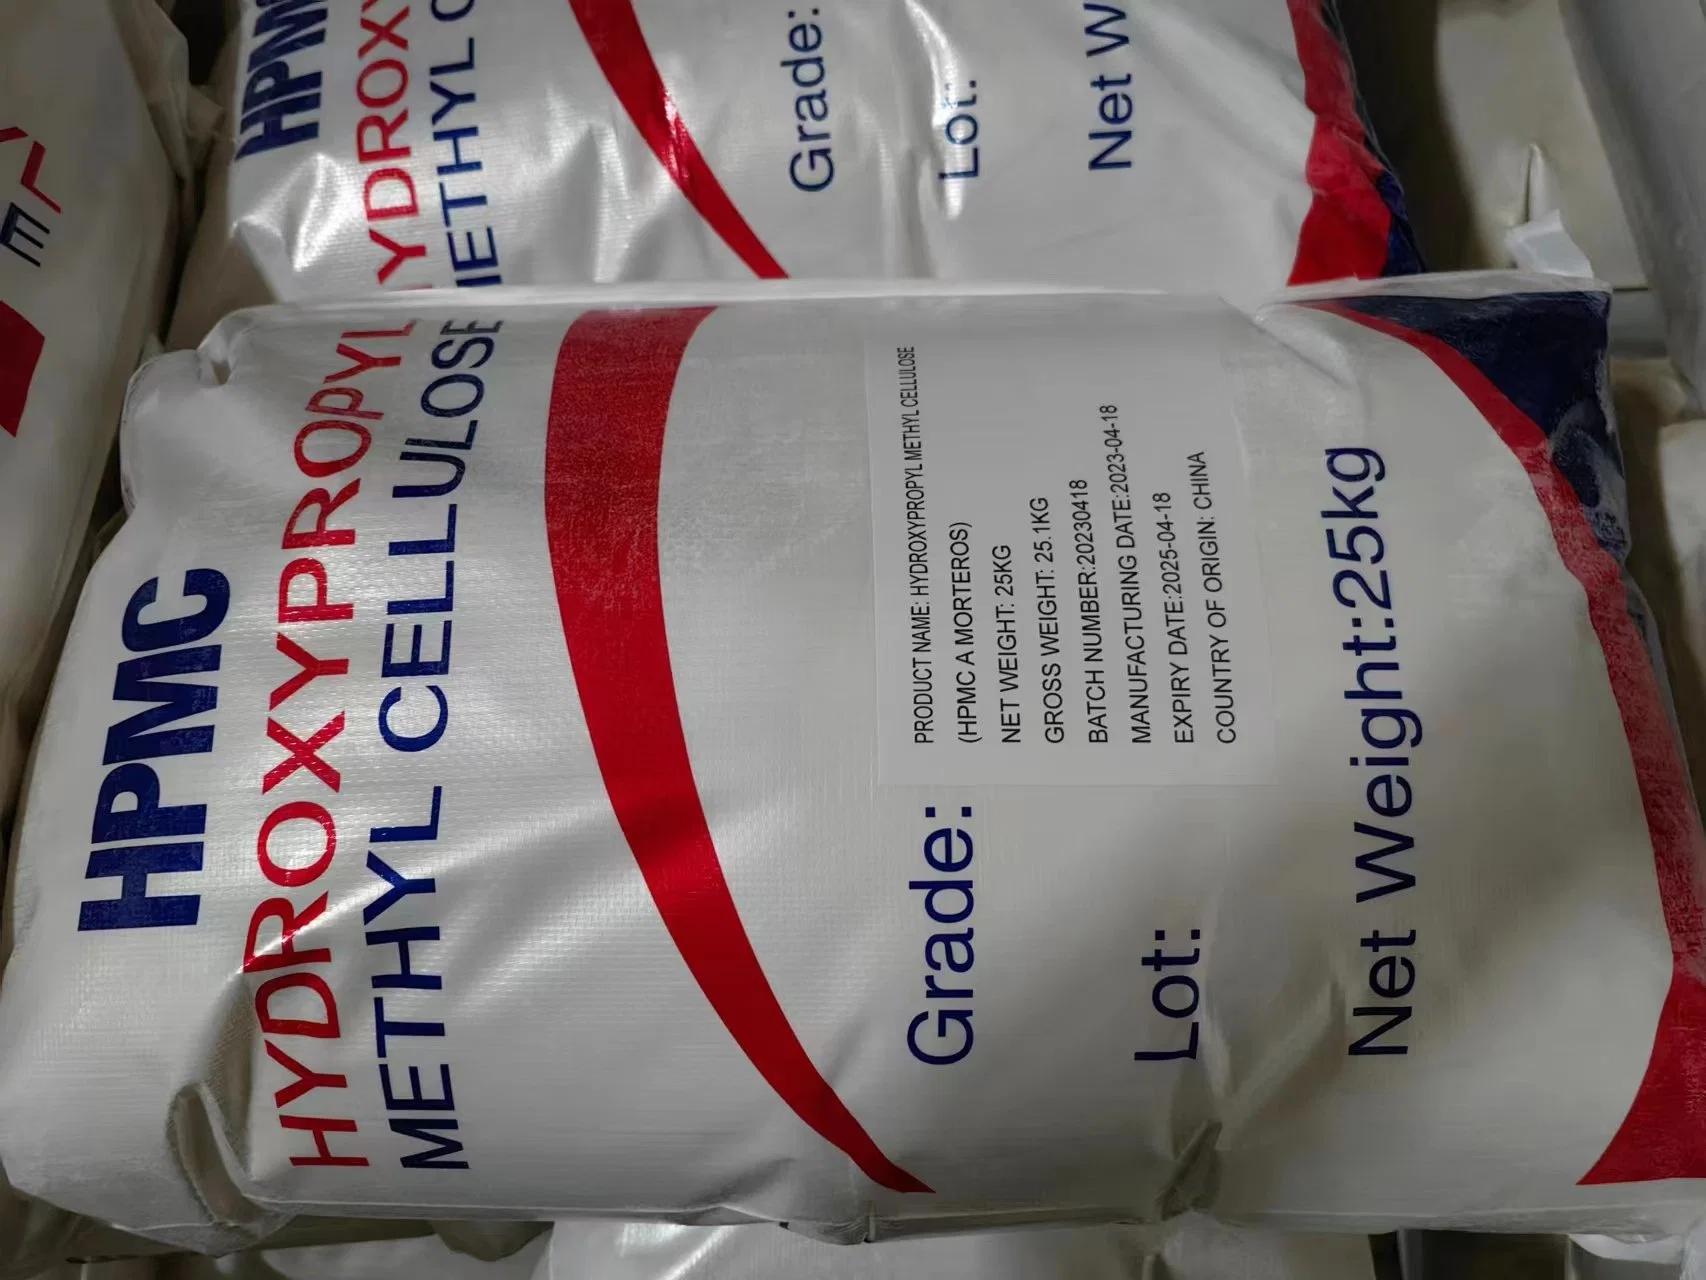 HPMC Chemical Raw Material HPMC Powder for Laundry Detergent Construction Glue Hydroxy Methyl Propyl Cellulose HPMC